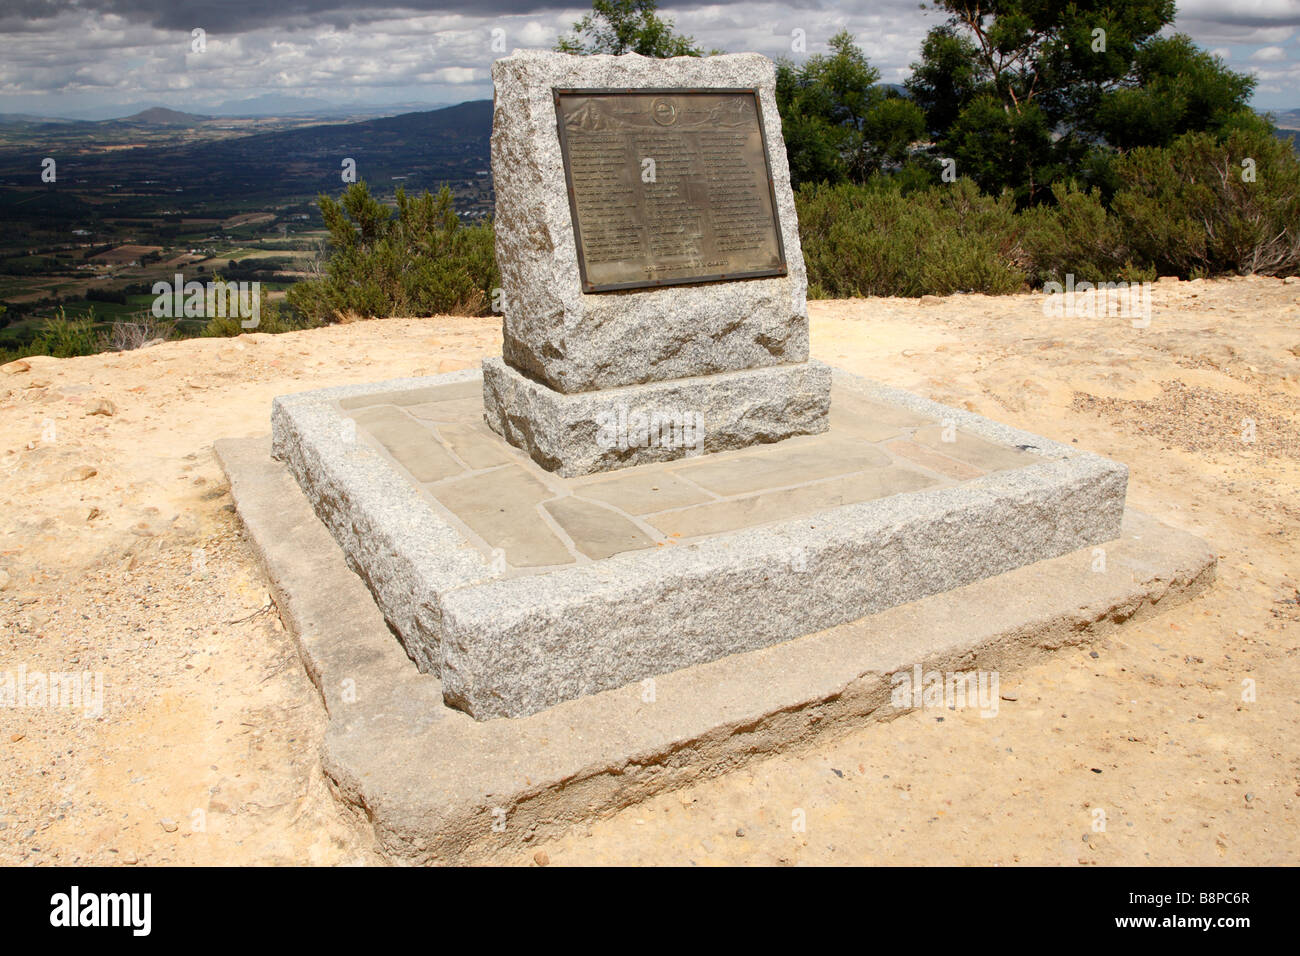 monument to the italian pow's who helped build the du toitskloof pass south africa Stock Photo